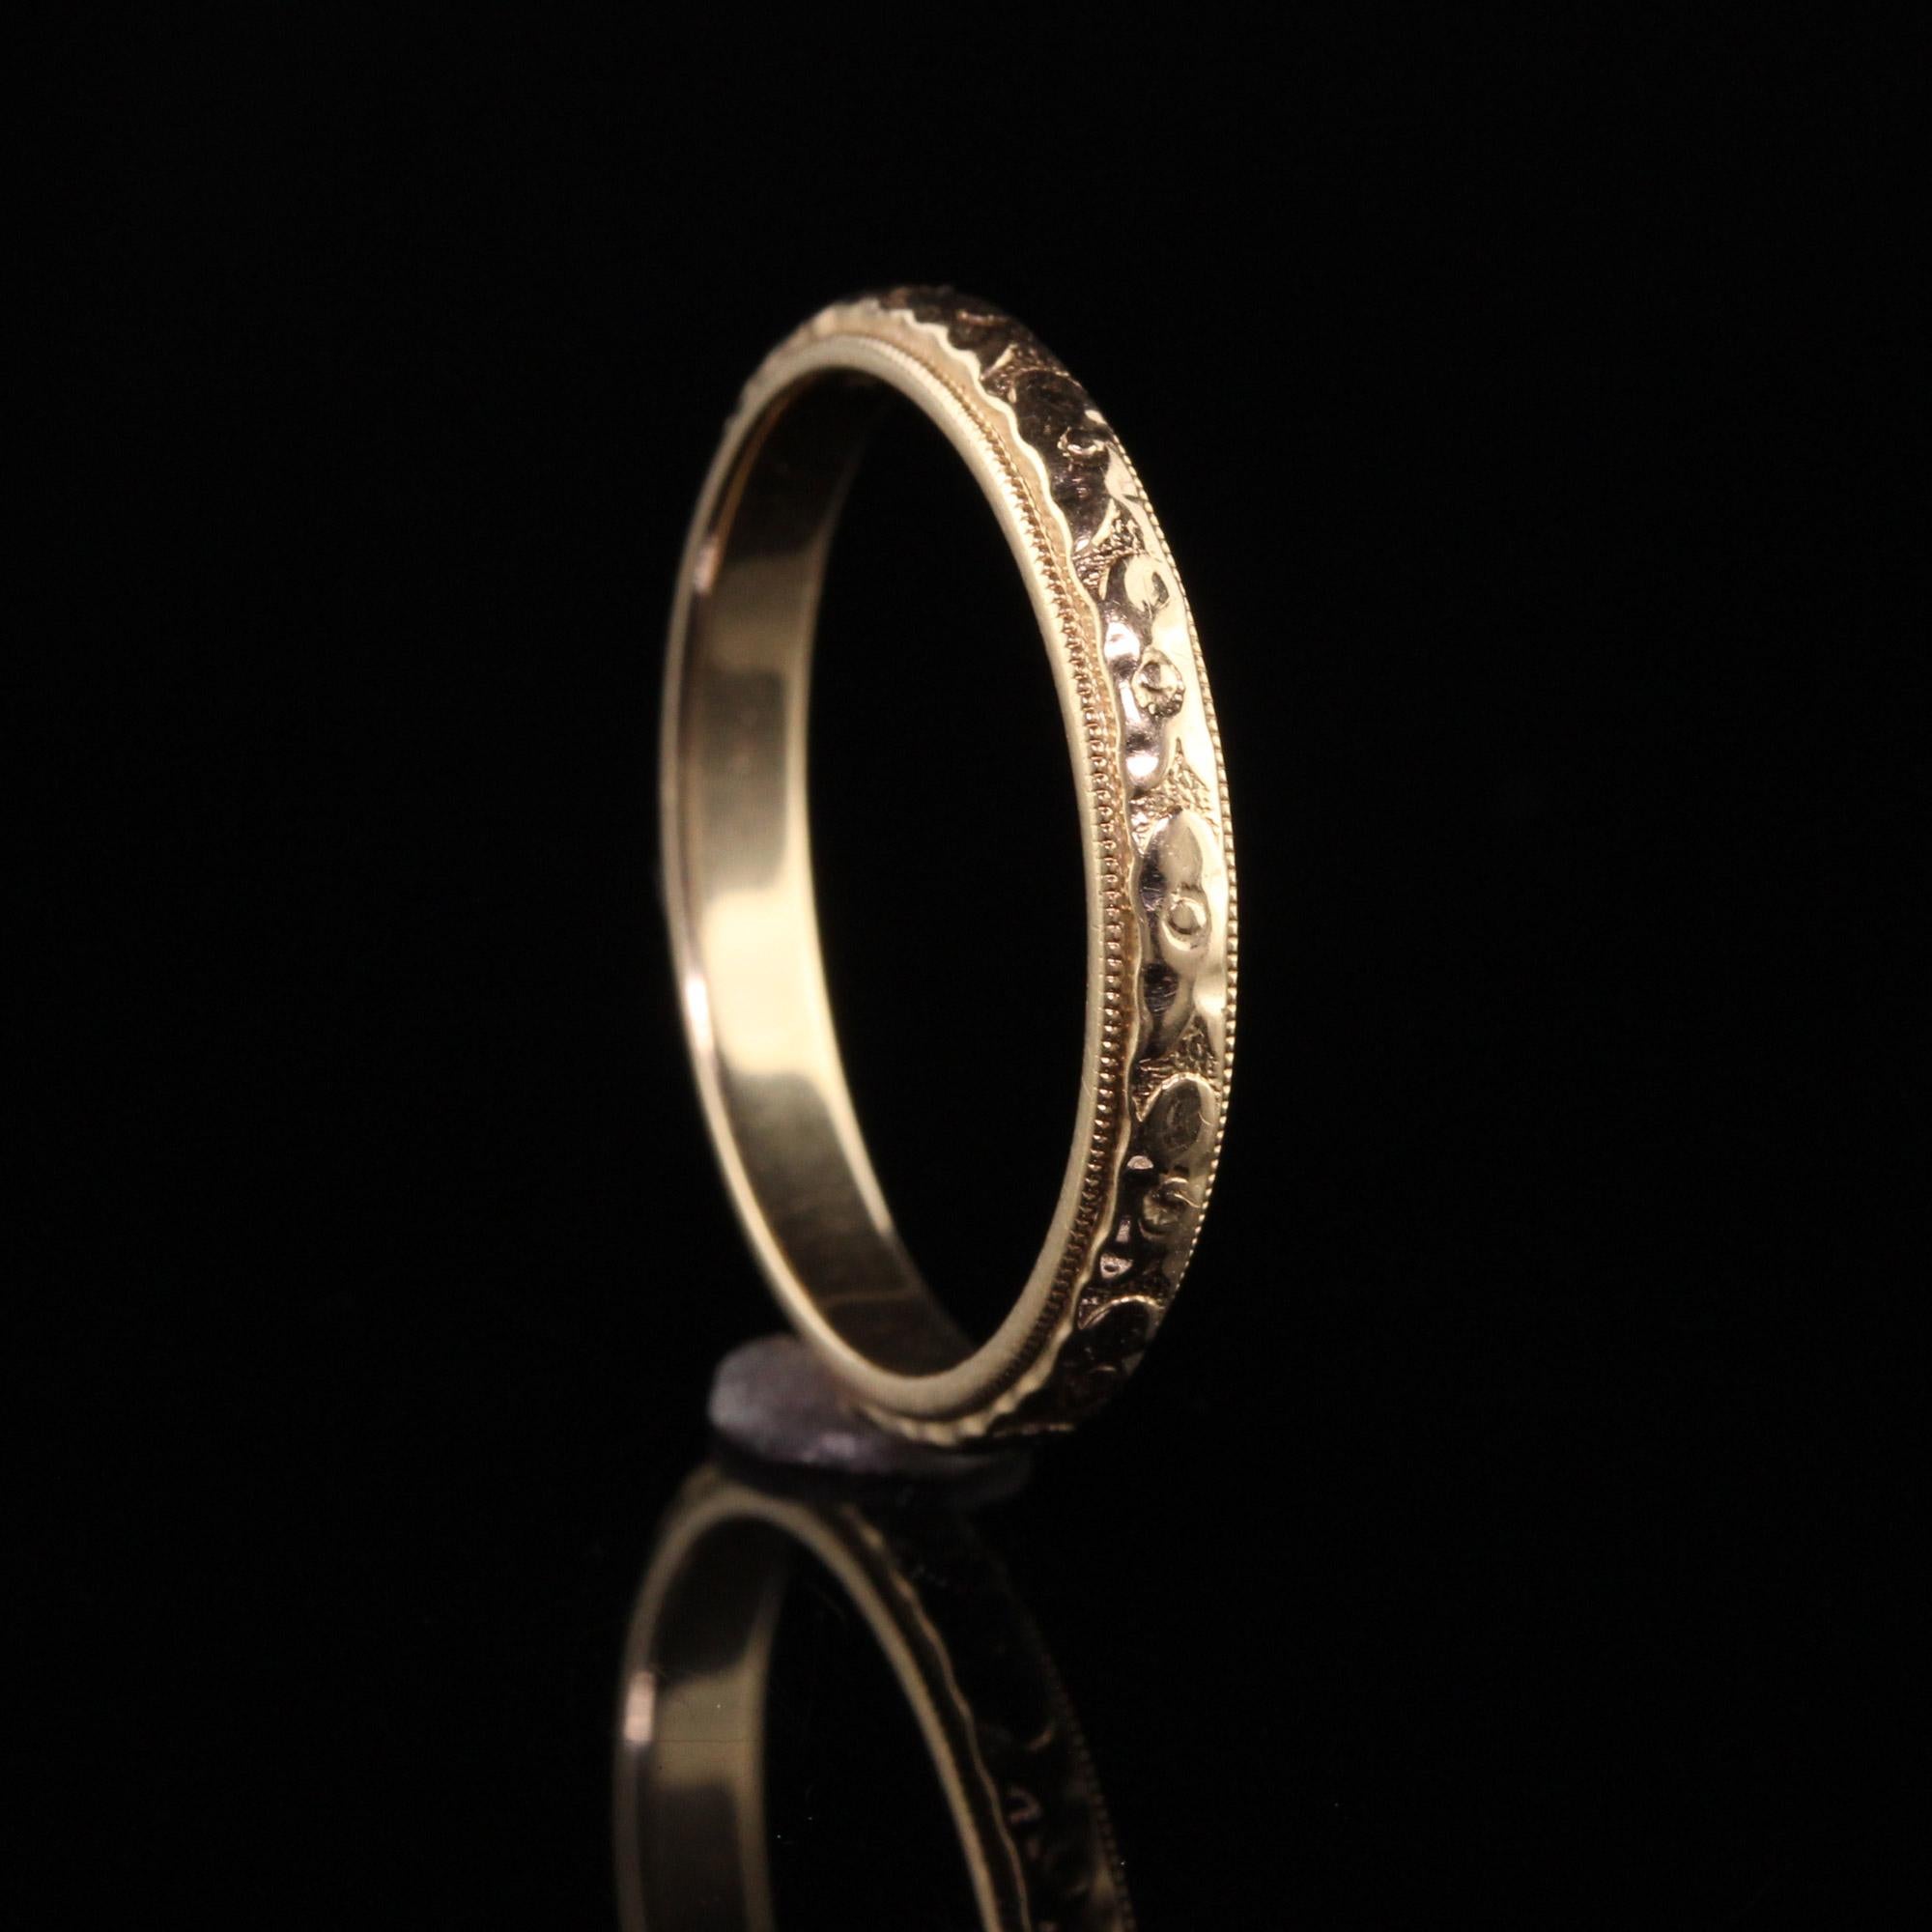 Antique Art Deco 14K Yellow Gold Engraved Wedding Band For Sale 1